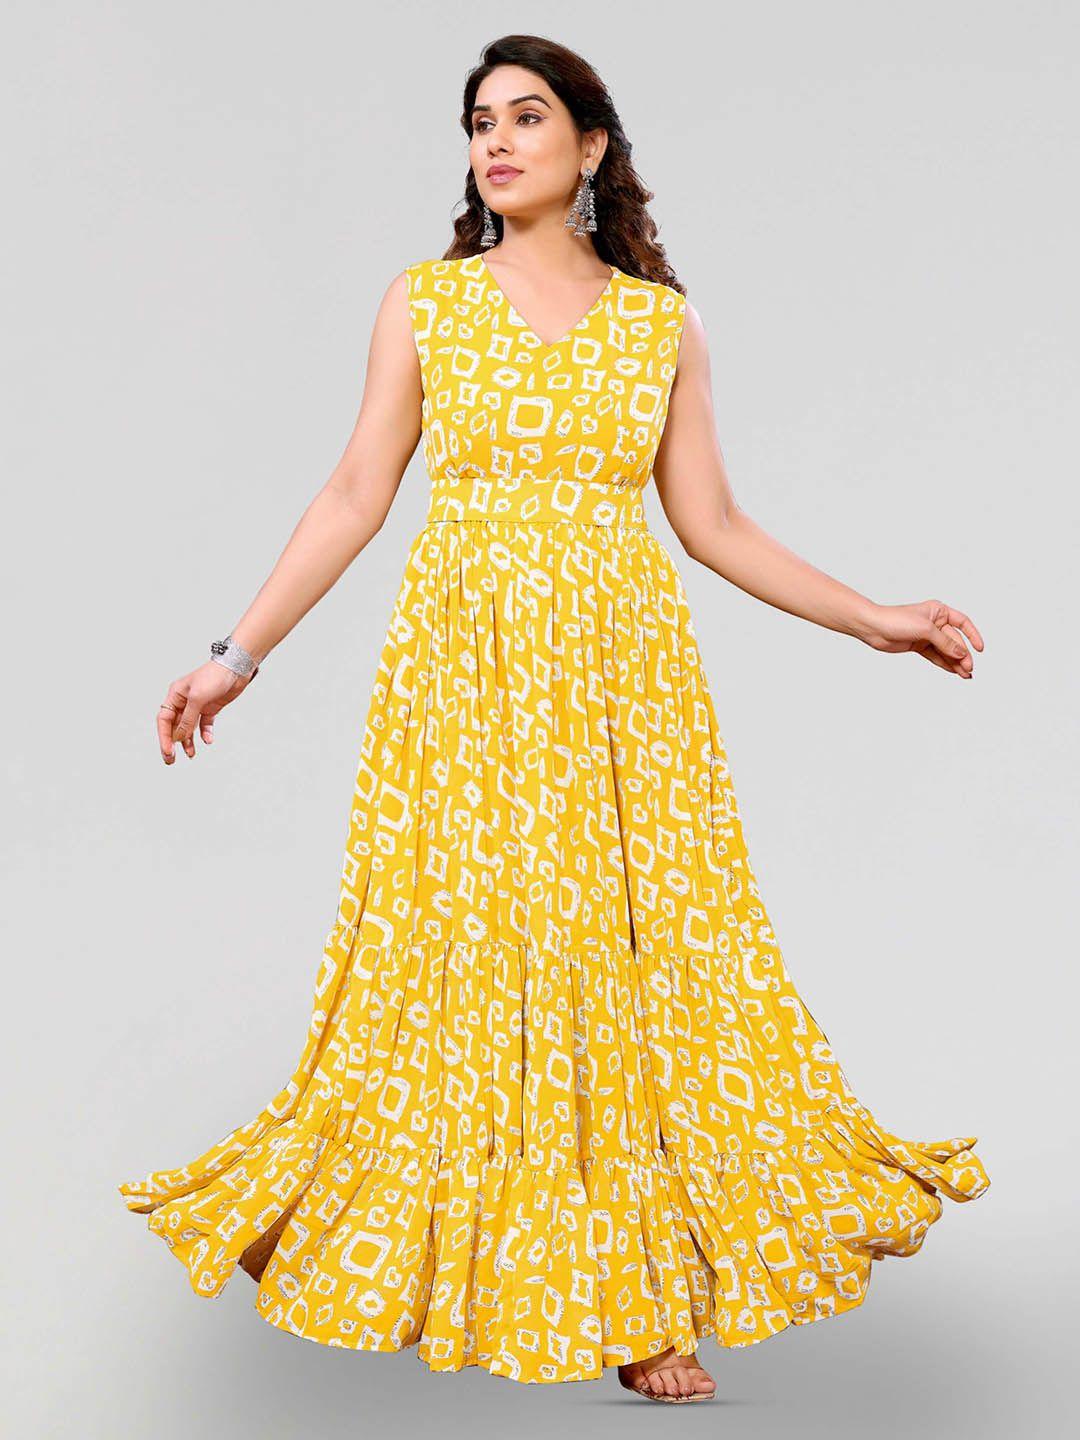 pyari---a-style-for-every-story-floral-print-ruffled-georgette-maxi-dress